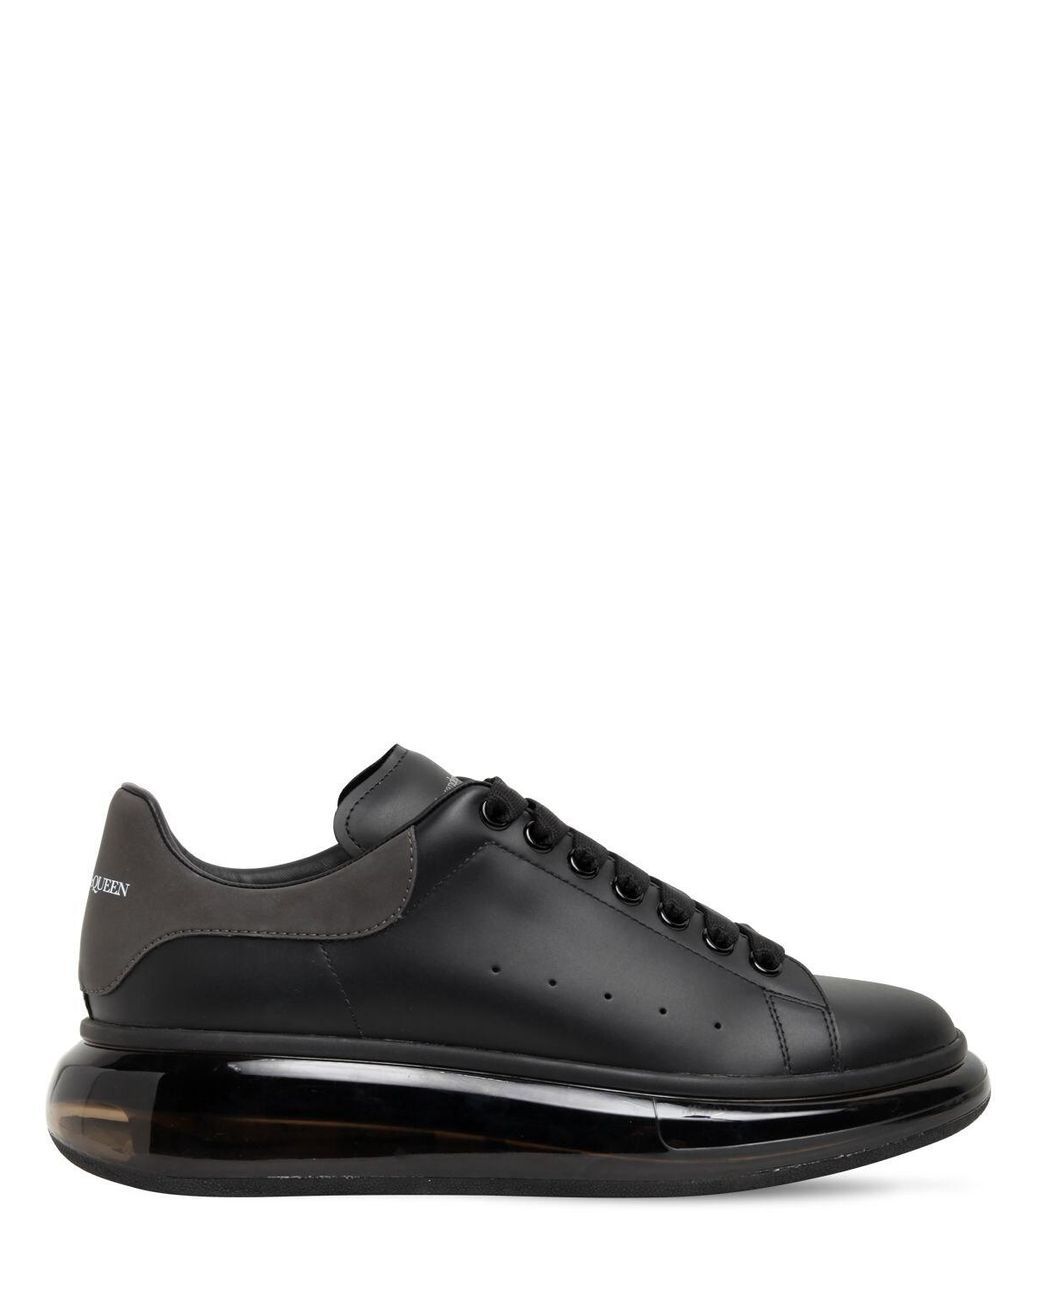 Alexander McQueen 45mm Air Reflect Leather Sneakers in Black for Men - Lyst